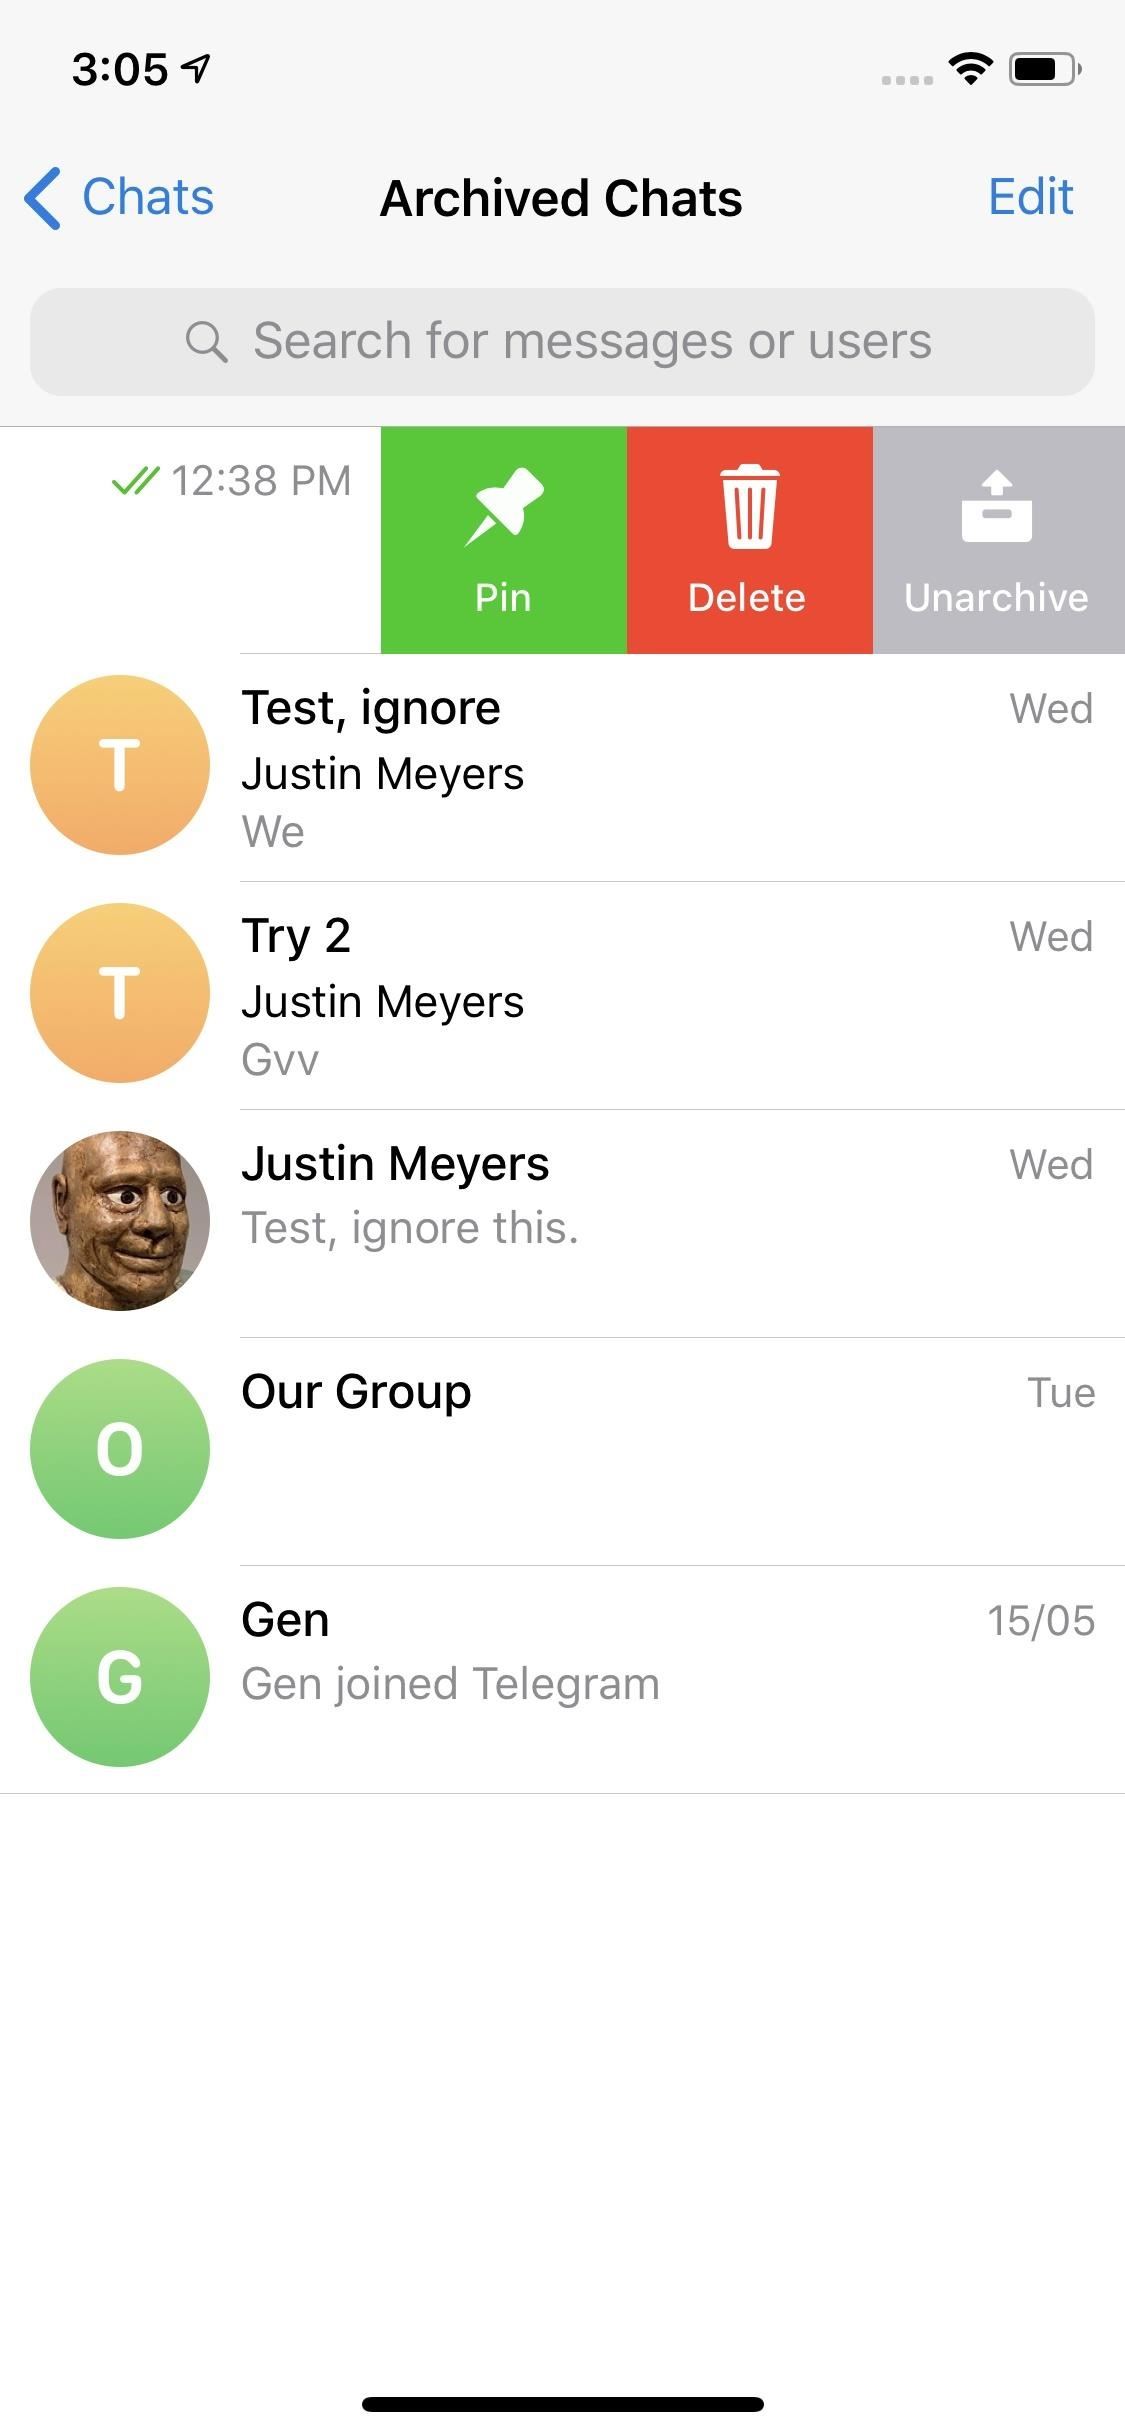 How to Archive Telegram Conversations to Keep Your Main Chats List Clean & Organized